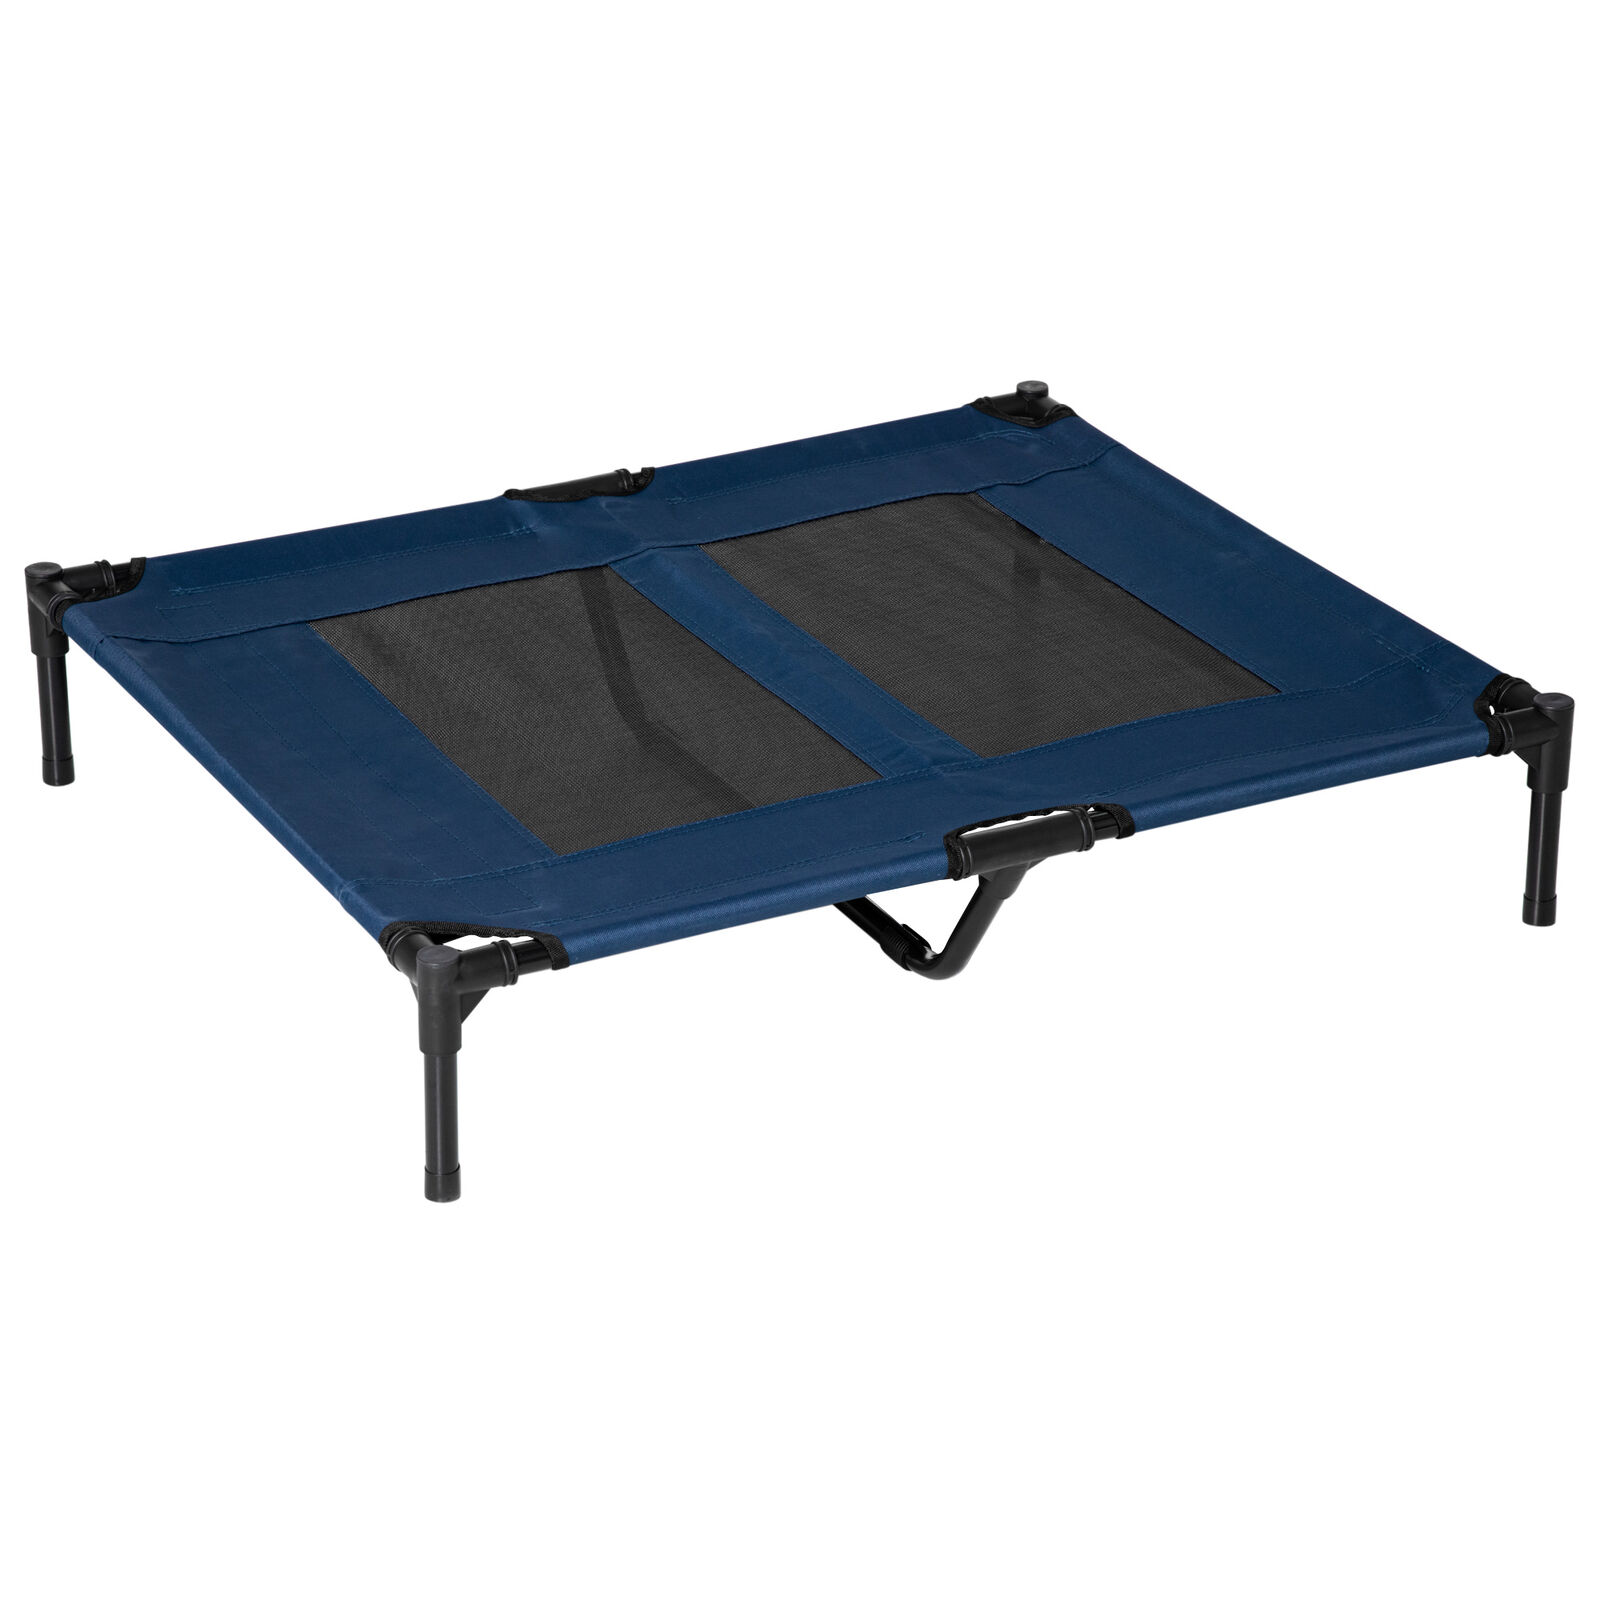 Pawhut Portable Large Dog Cat Elevated Bed Camping Pet Cot Indoor/Outdoor Blue